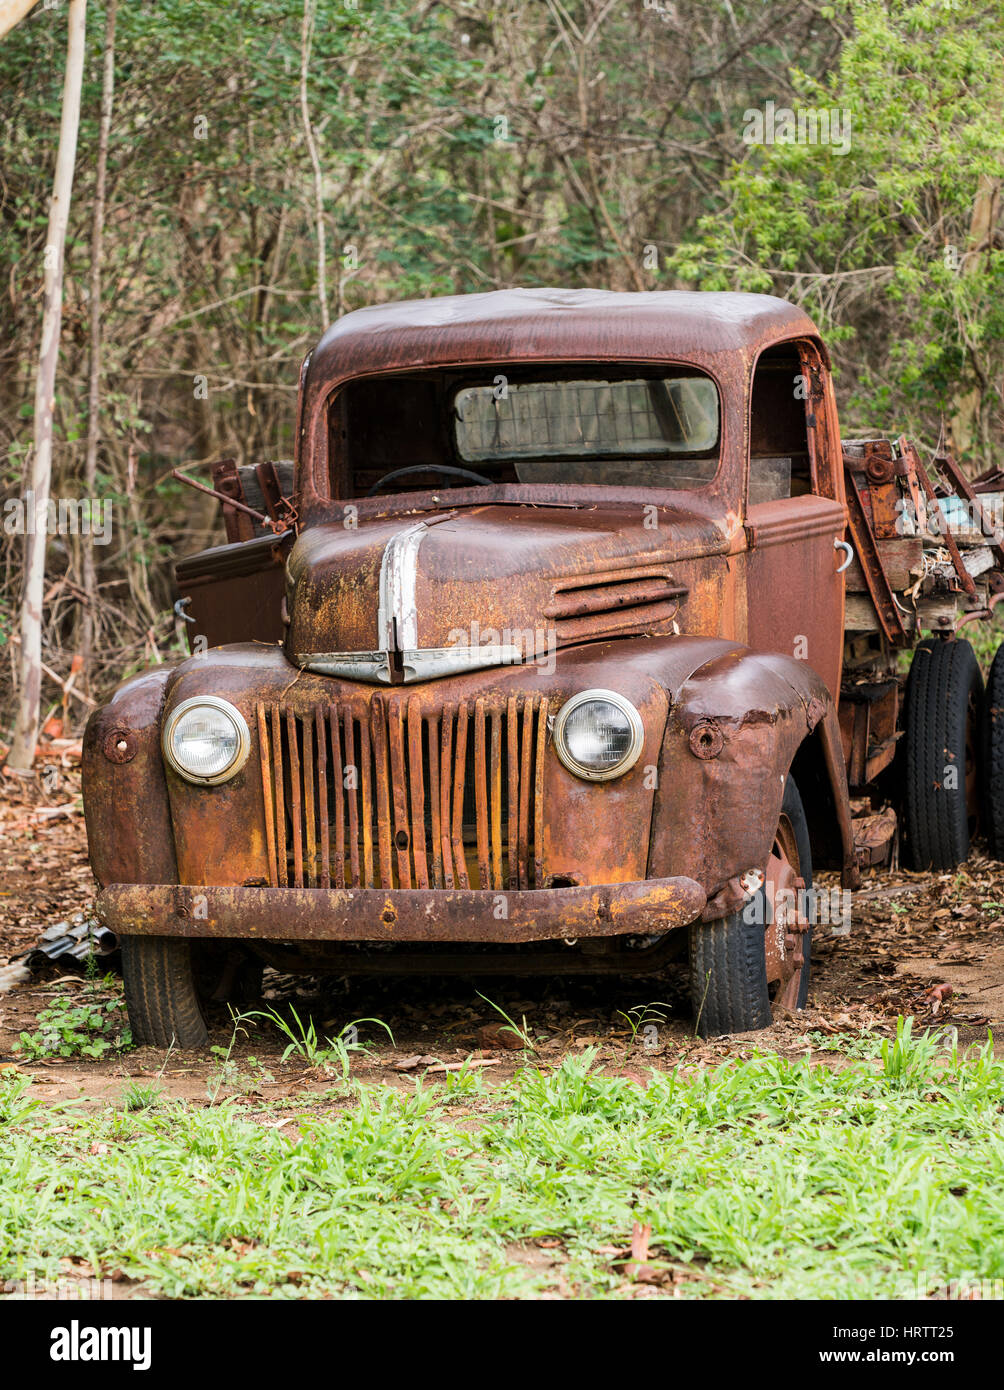 Old abandoned rusty Ford truck in field Stock Photo - Alamy